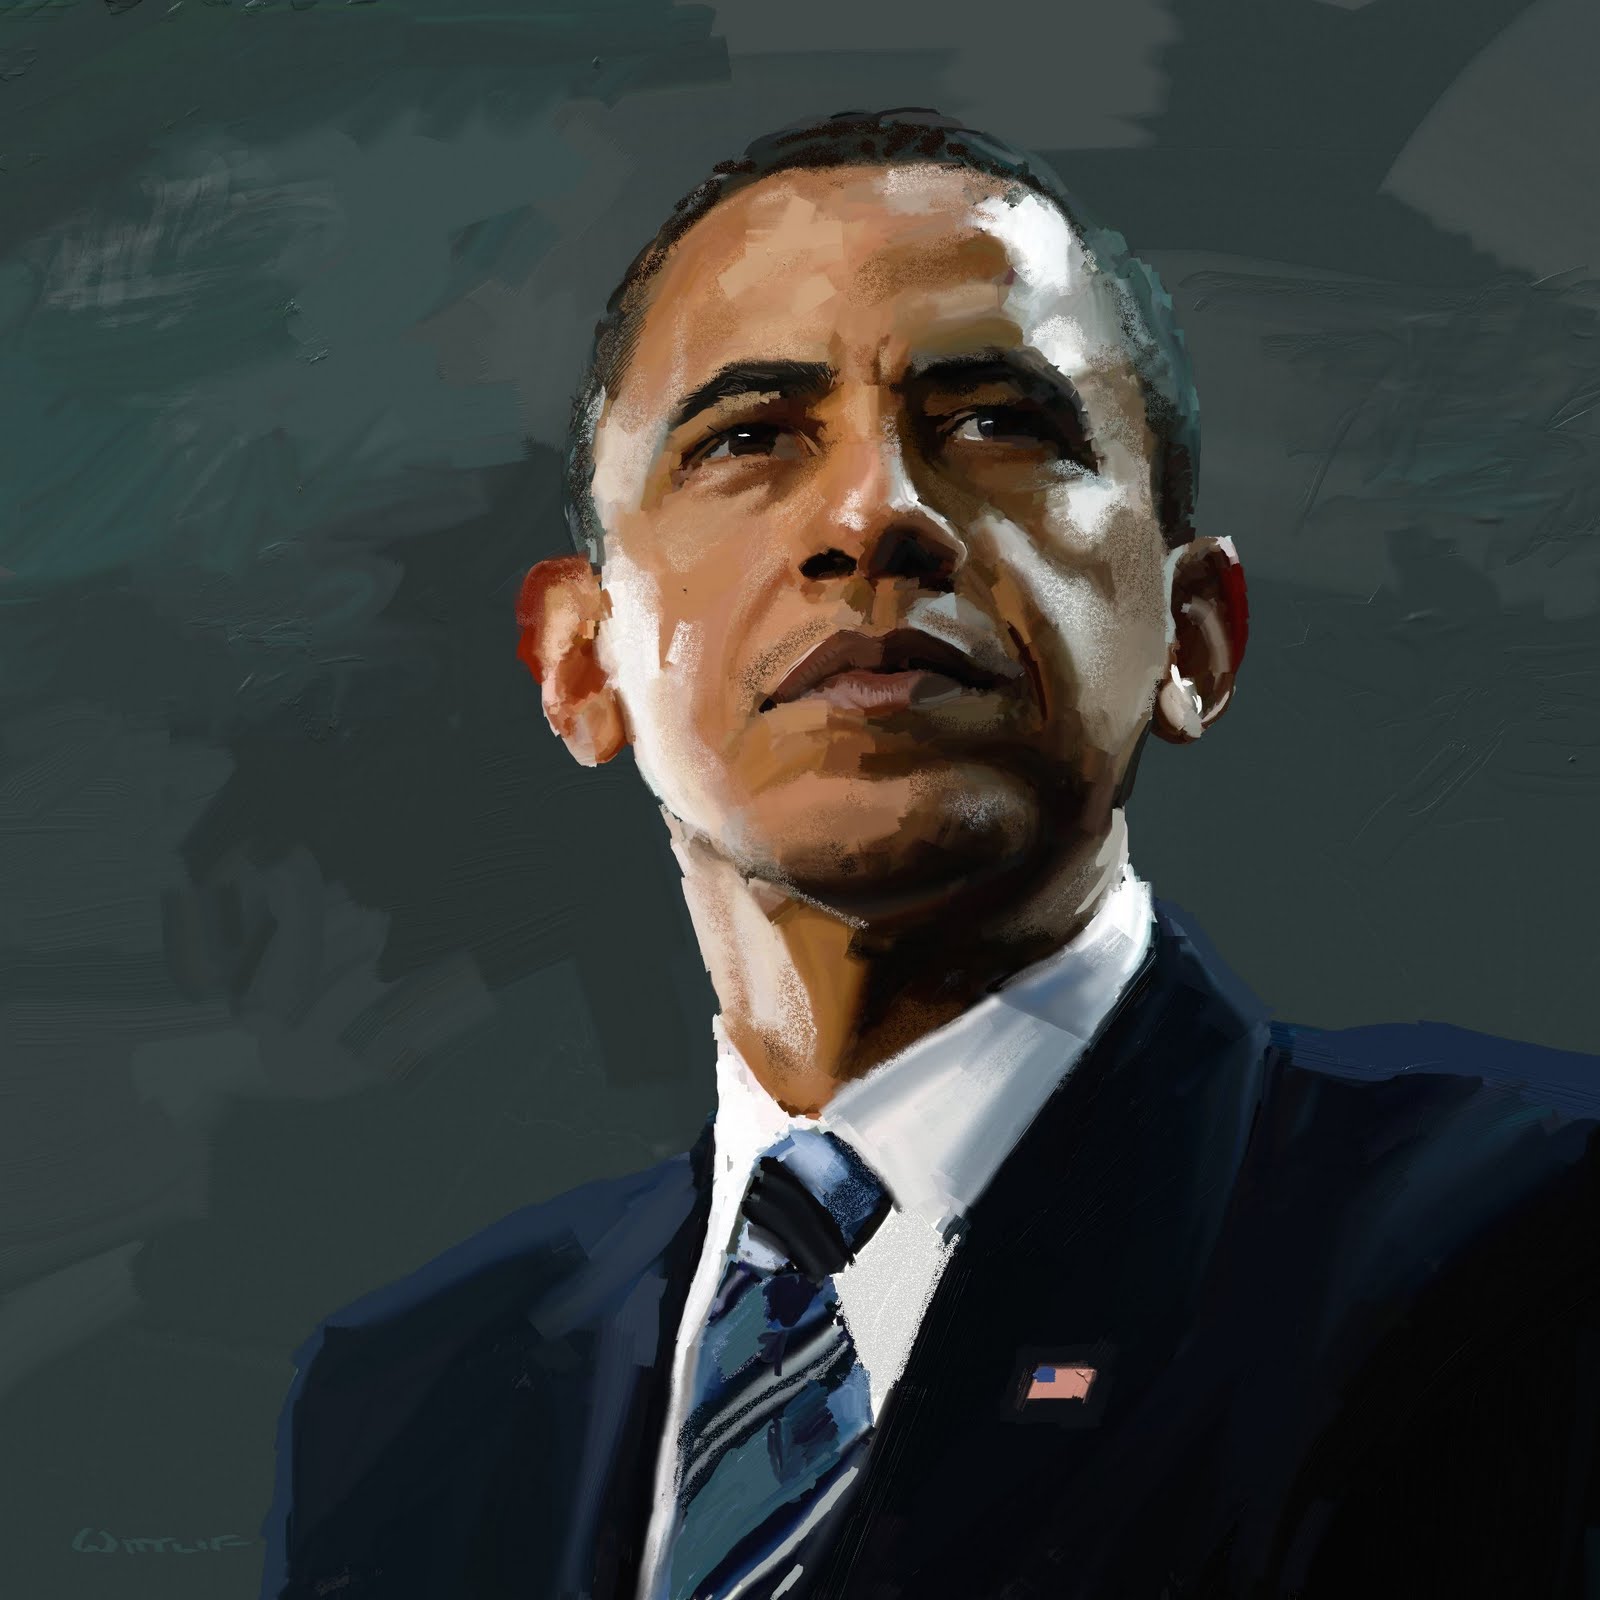 Painting The Presidents | Marking Paper- Illustration and Fine Art of ...